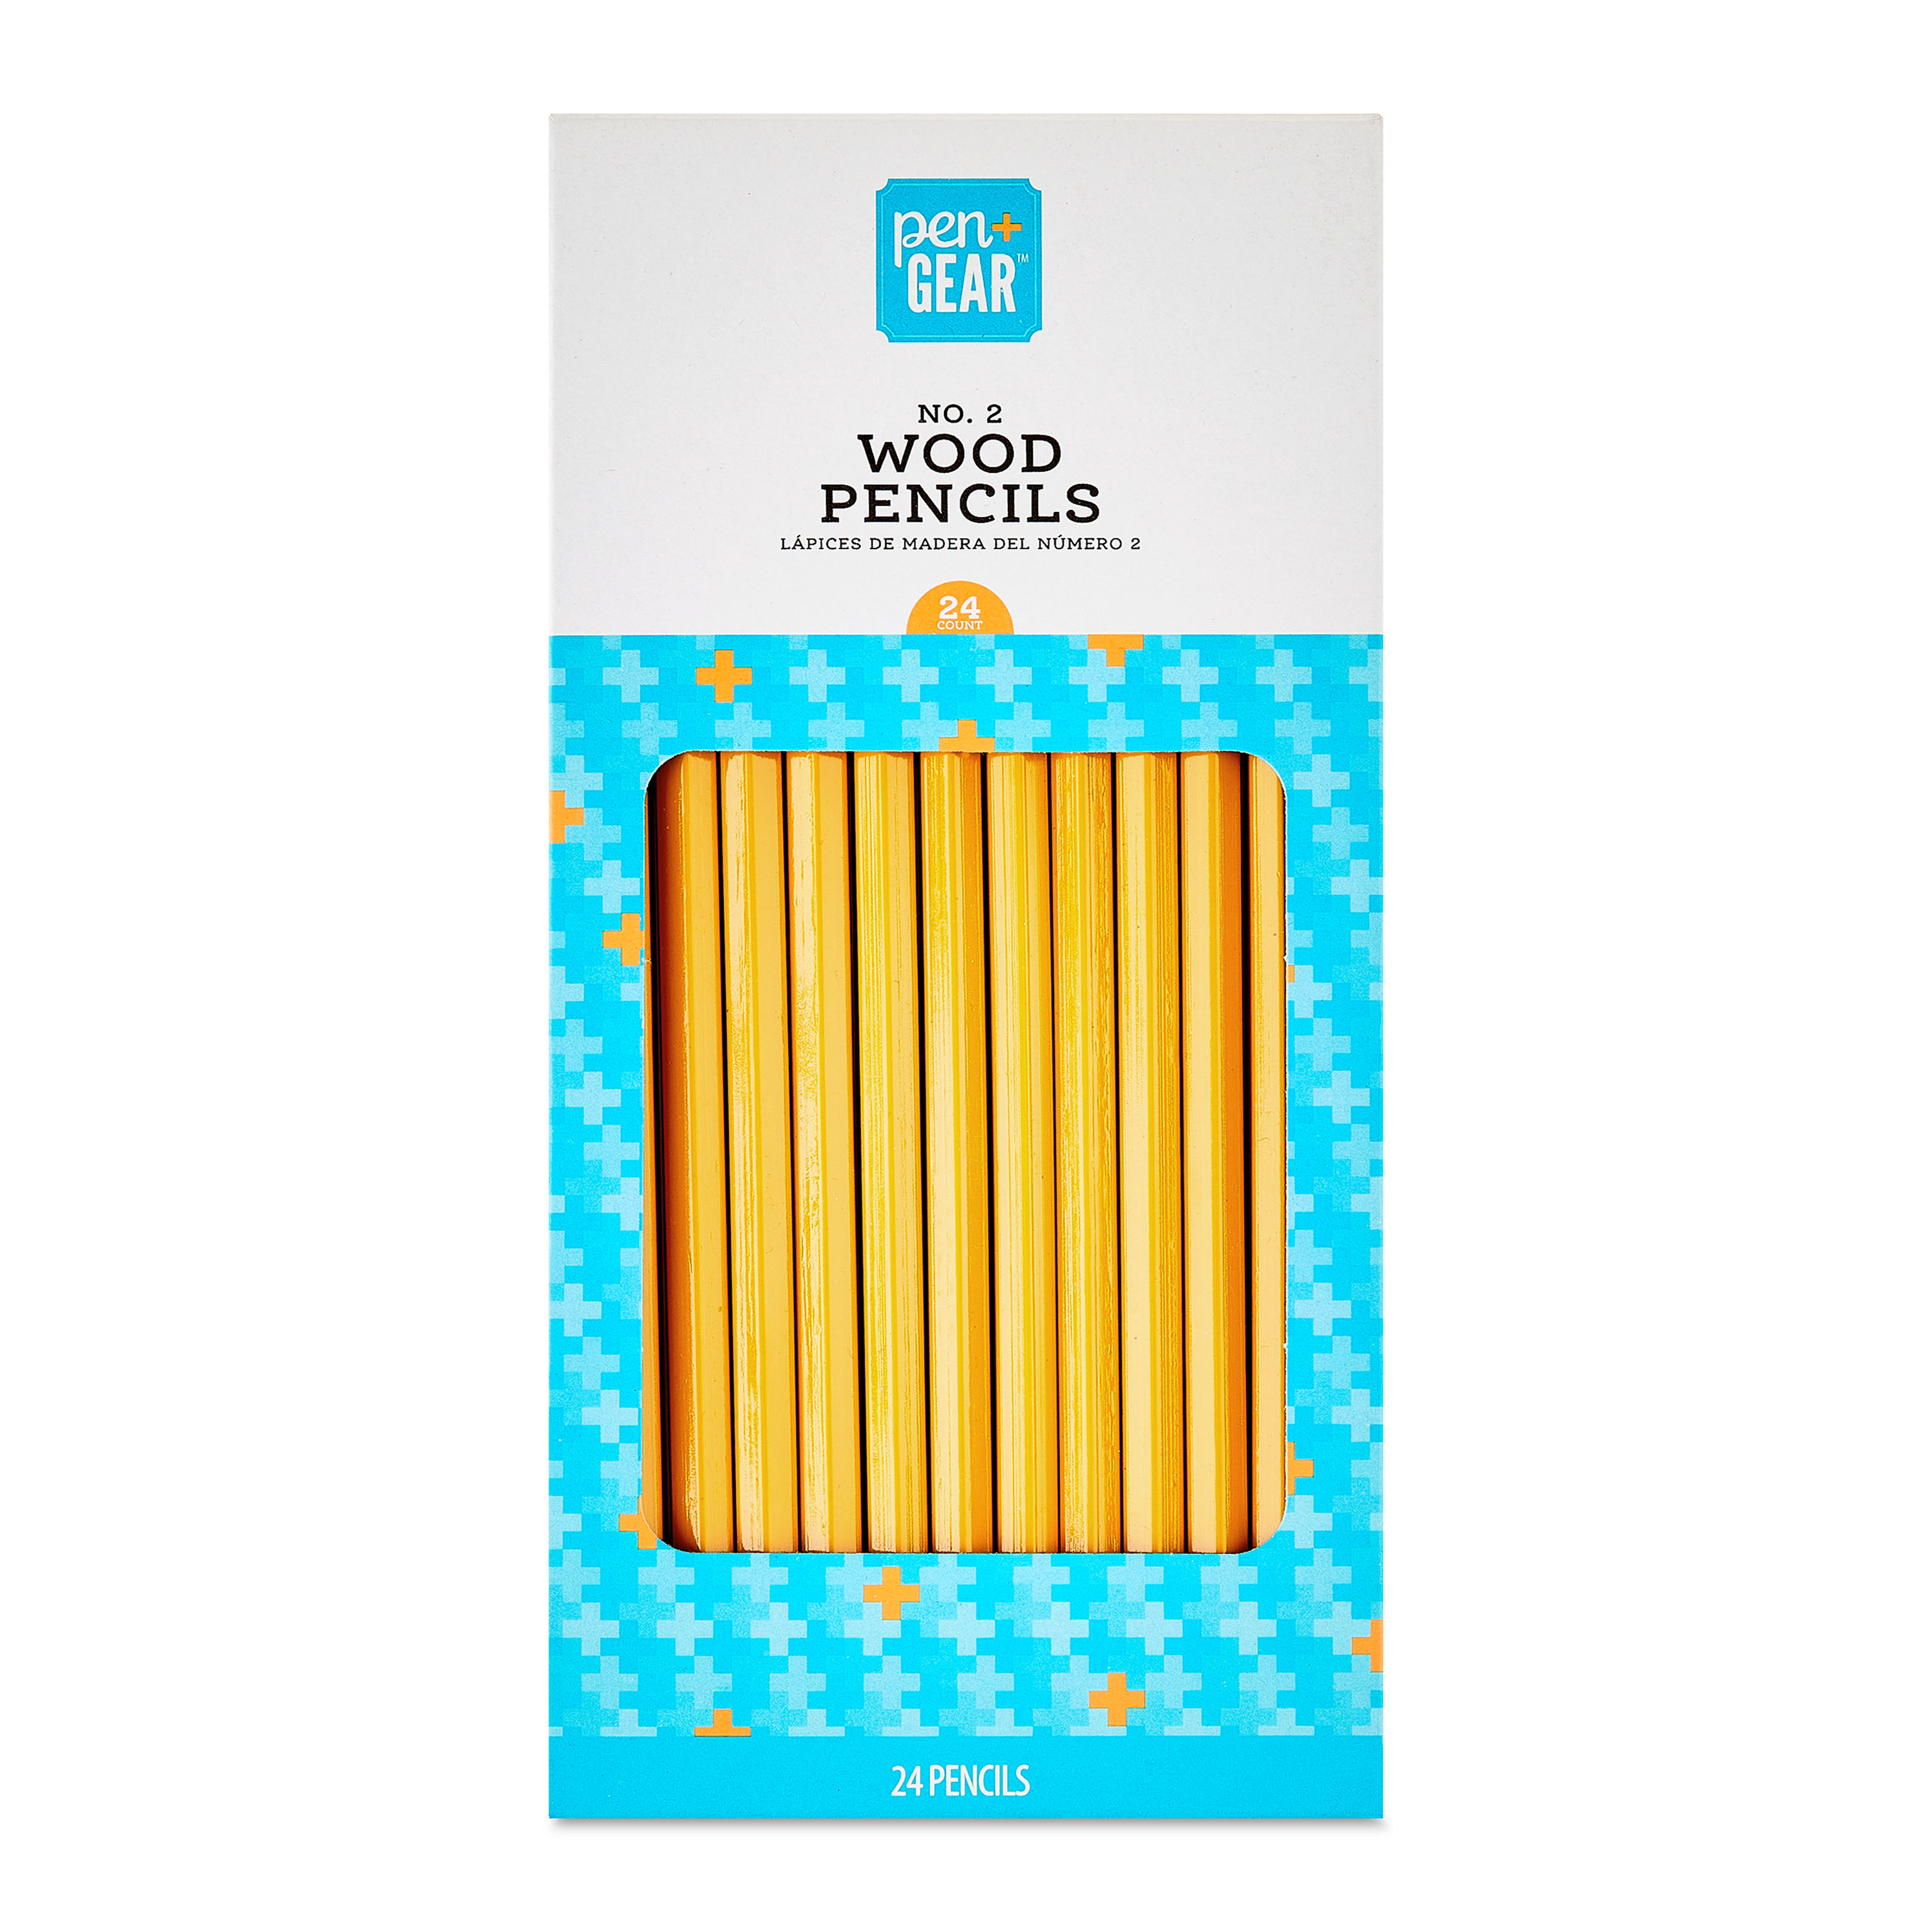 Pen+Gear No. 2 Wood Pencils, Unsharpened, 24 Count - image 3 of 9